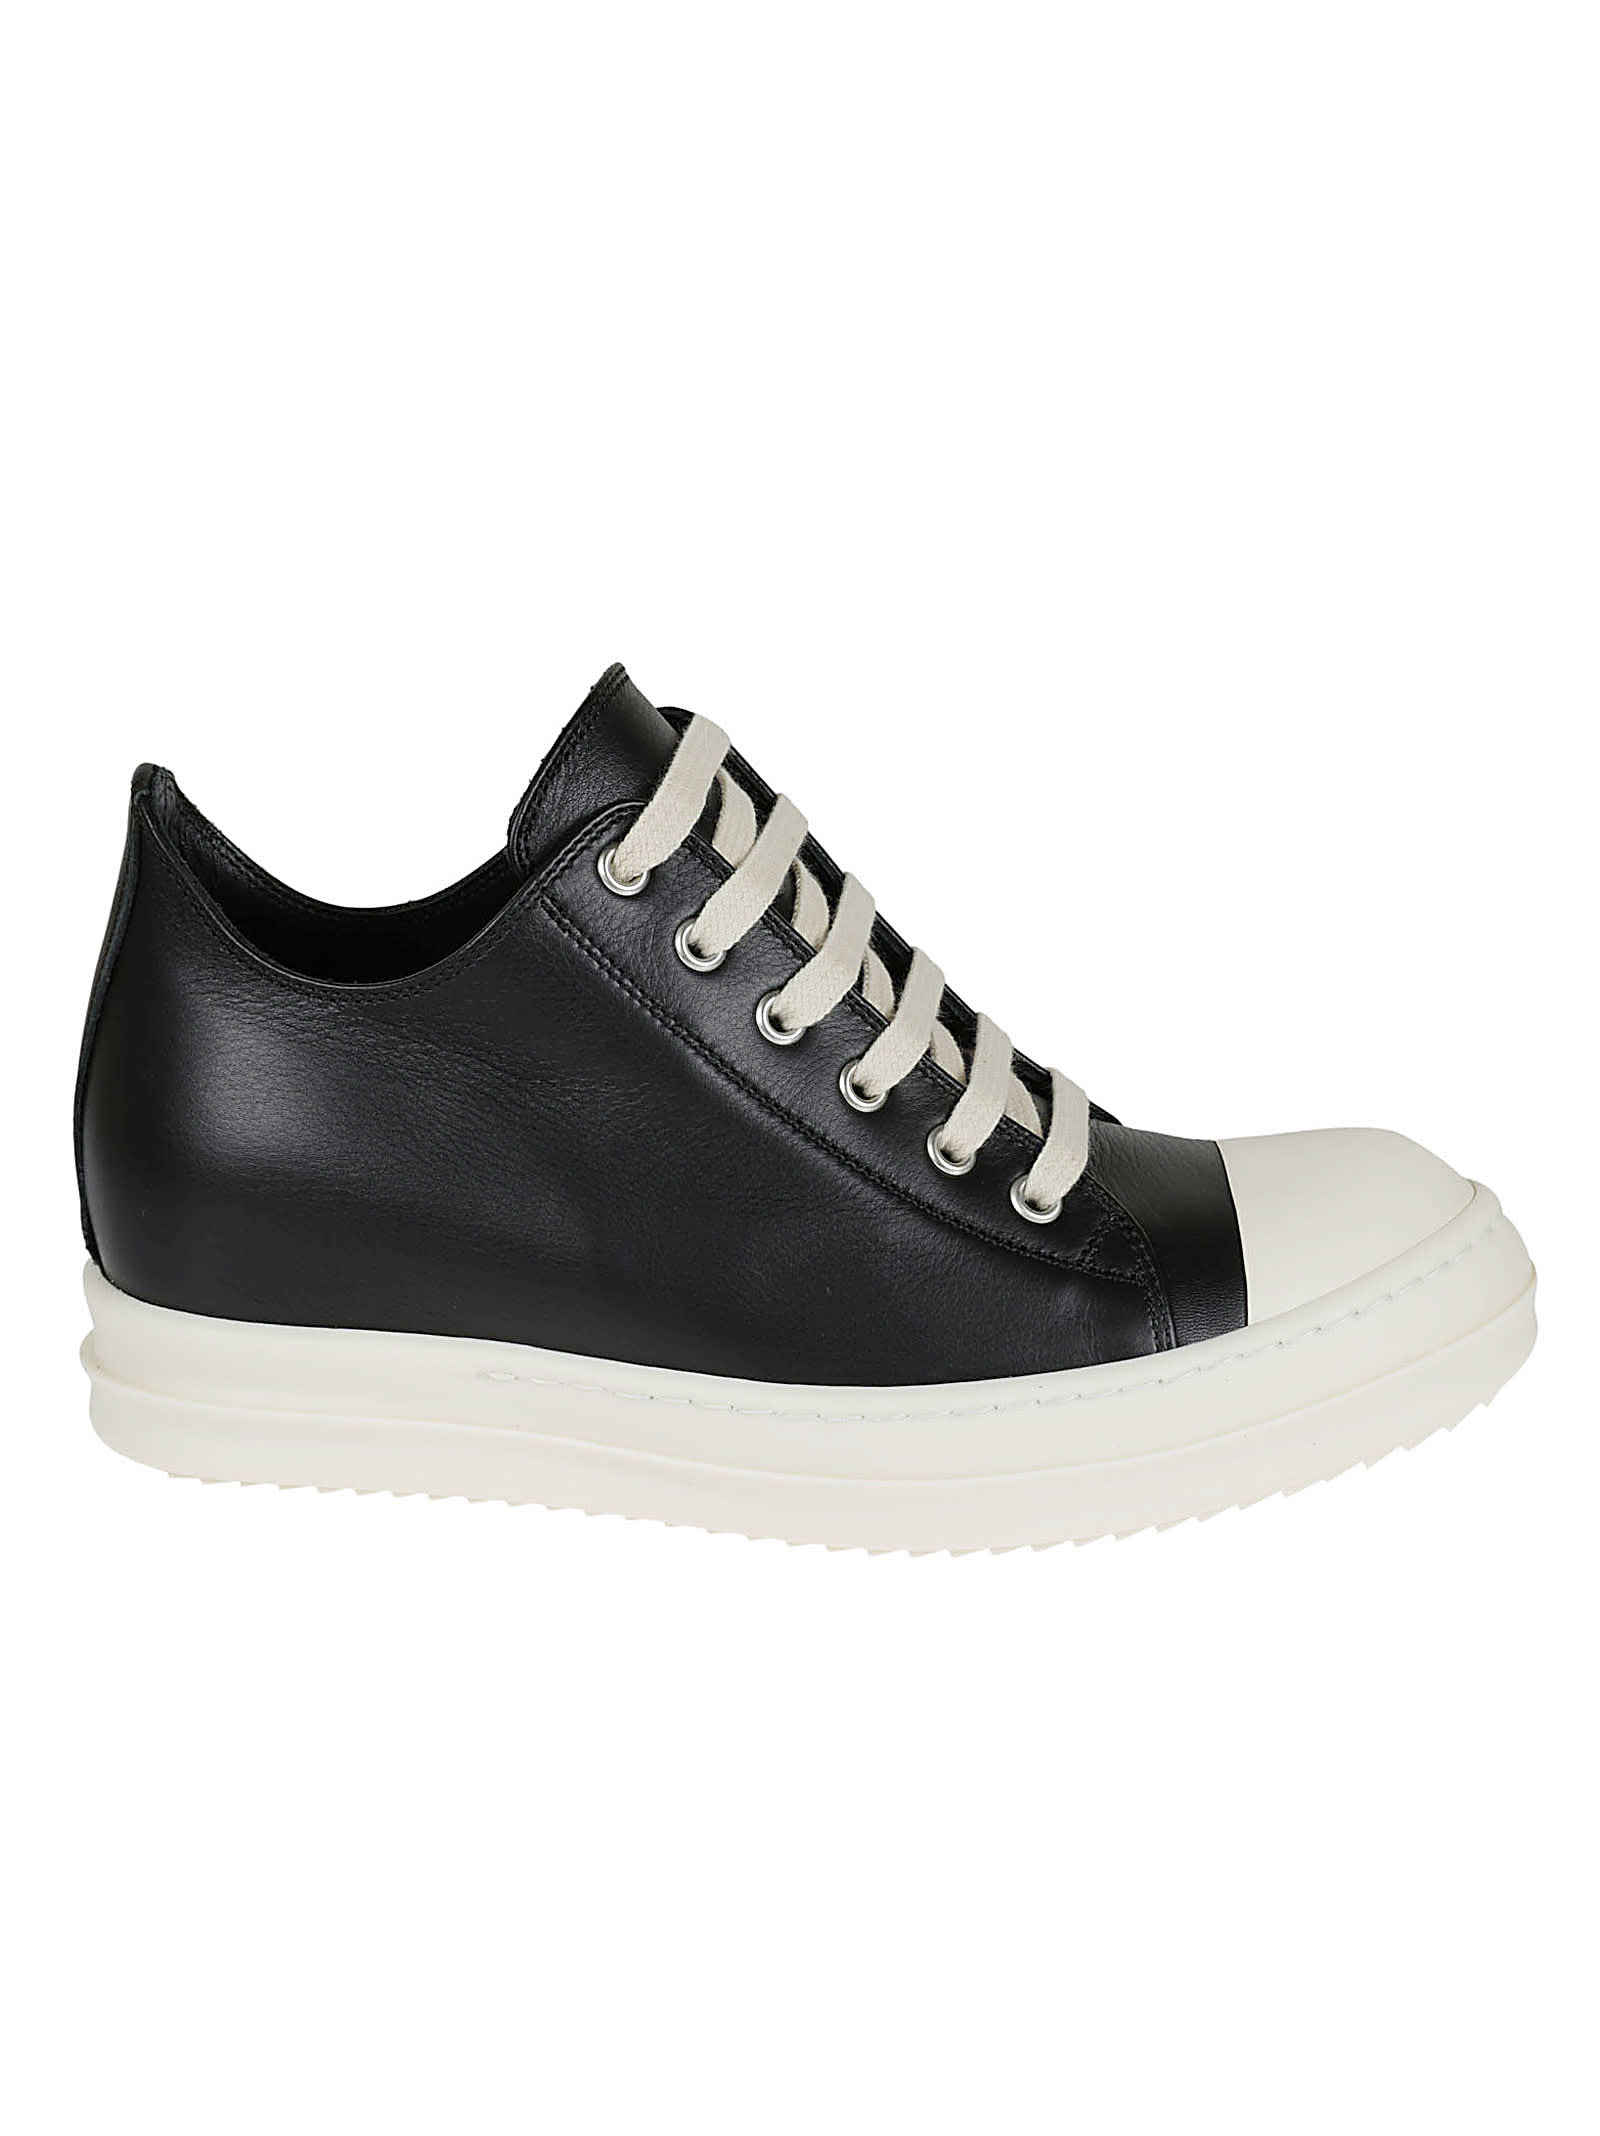 Rick Owens Classic Low Sneakers